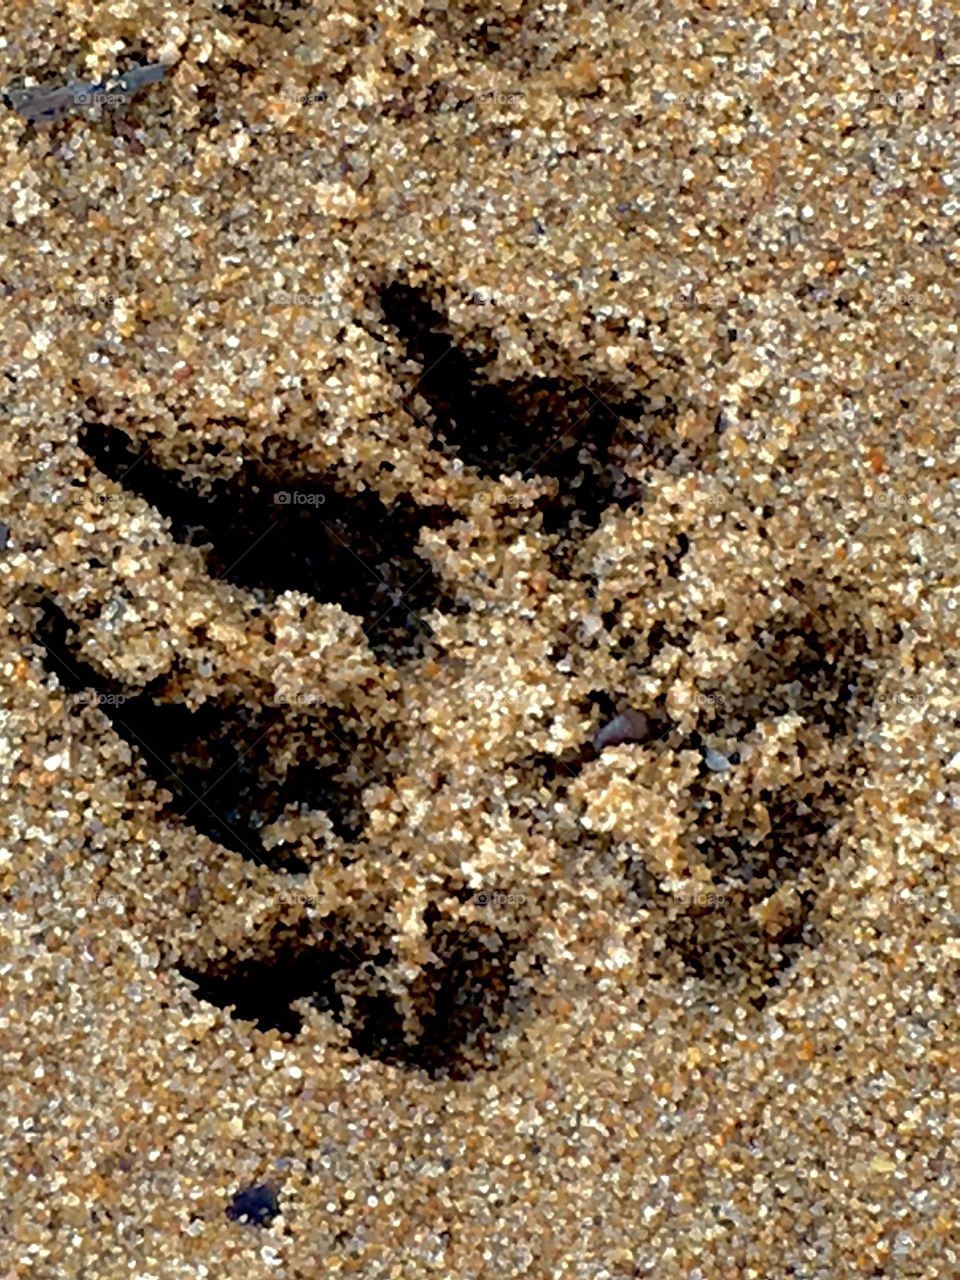 Paw print in the sand